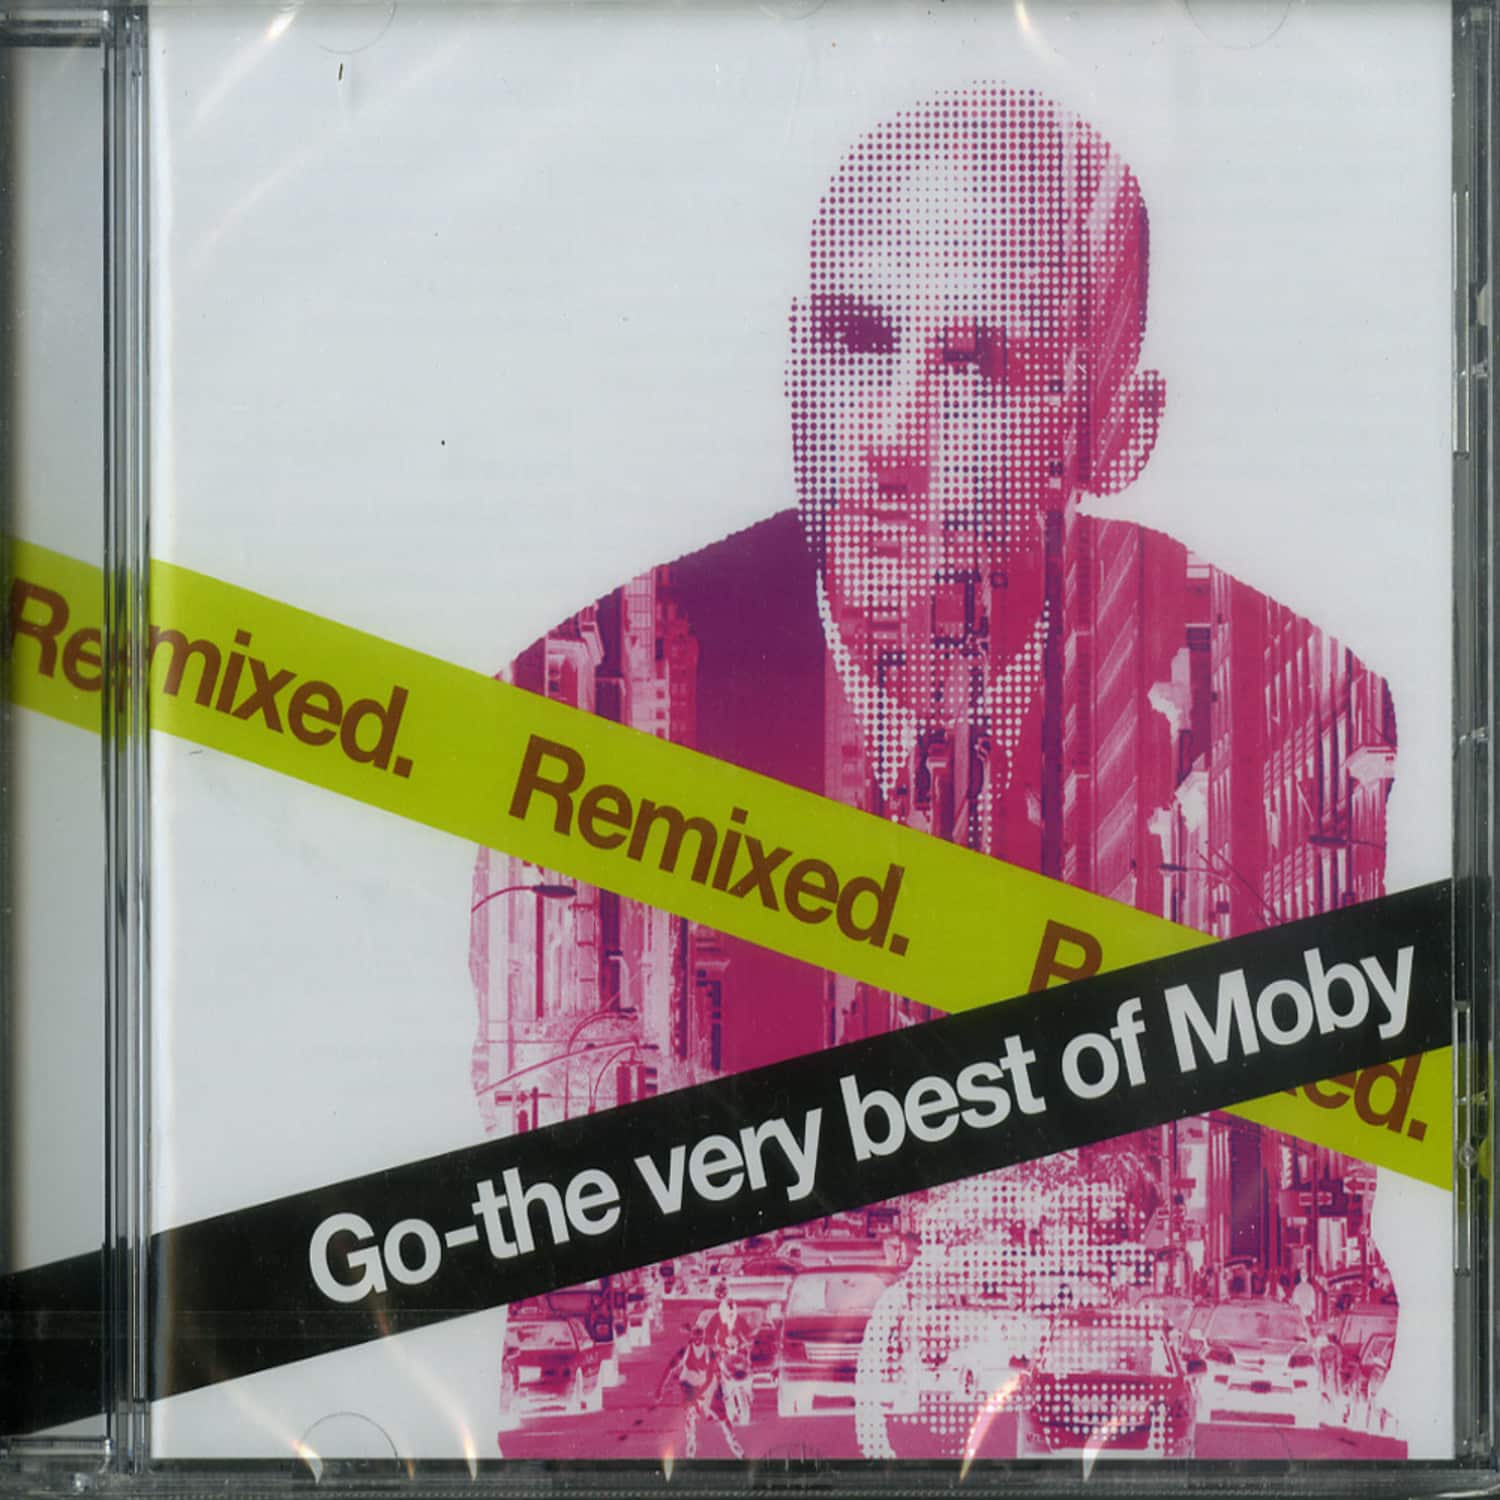 Moby - GO-THE VERY BEST OF MOBY REMIXED 